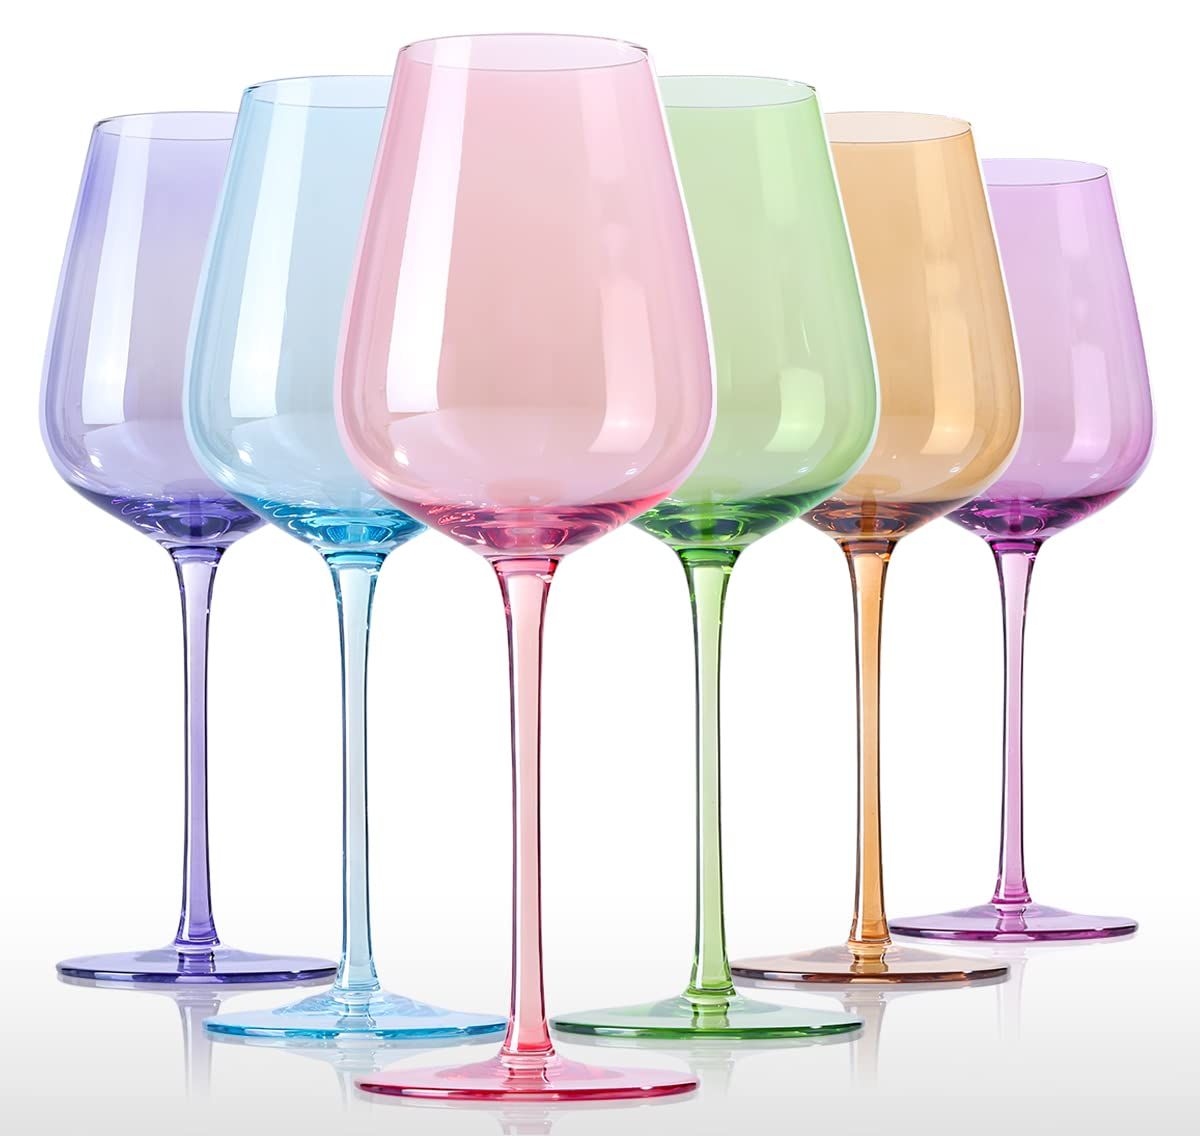 Physkoa Colored Wine Glasses Set Of 6 - Crystal Colorful Wine Glasses With Long Stem and Thin Rim,Pe | Amazon (US)